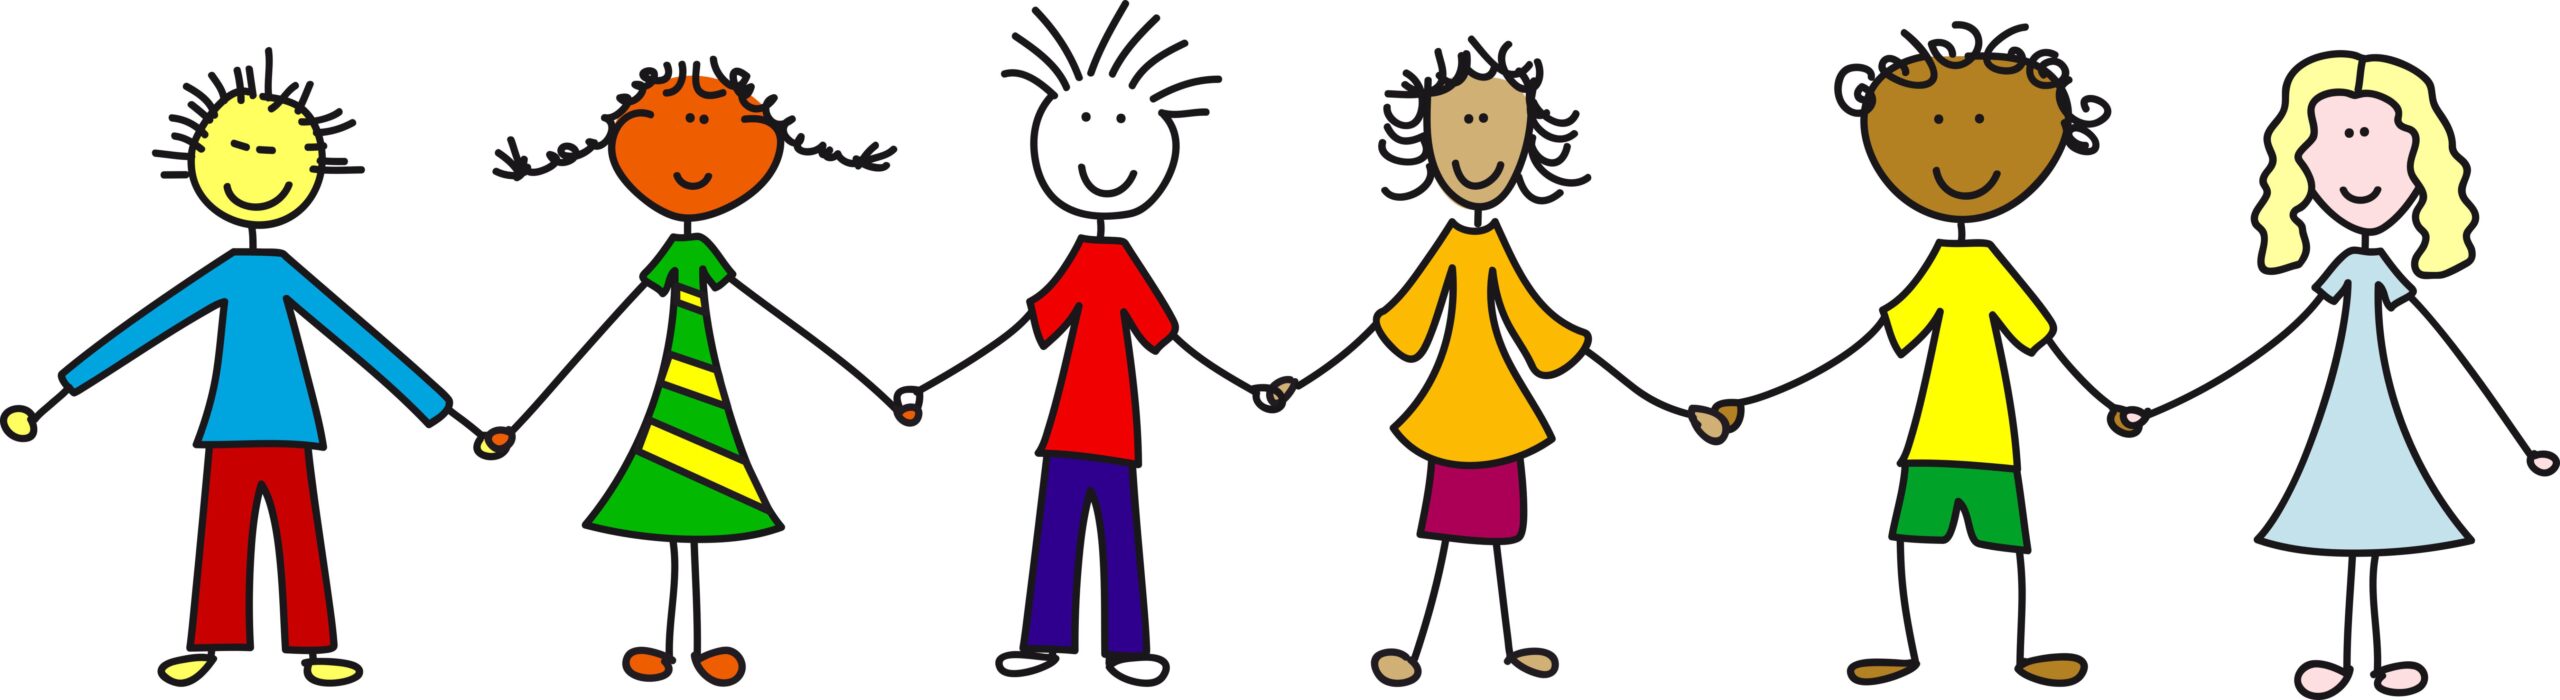 drawing of children holding hands